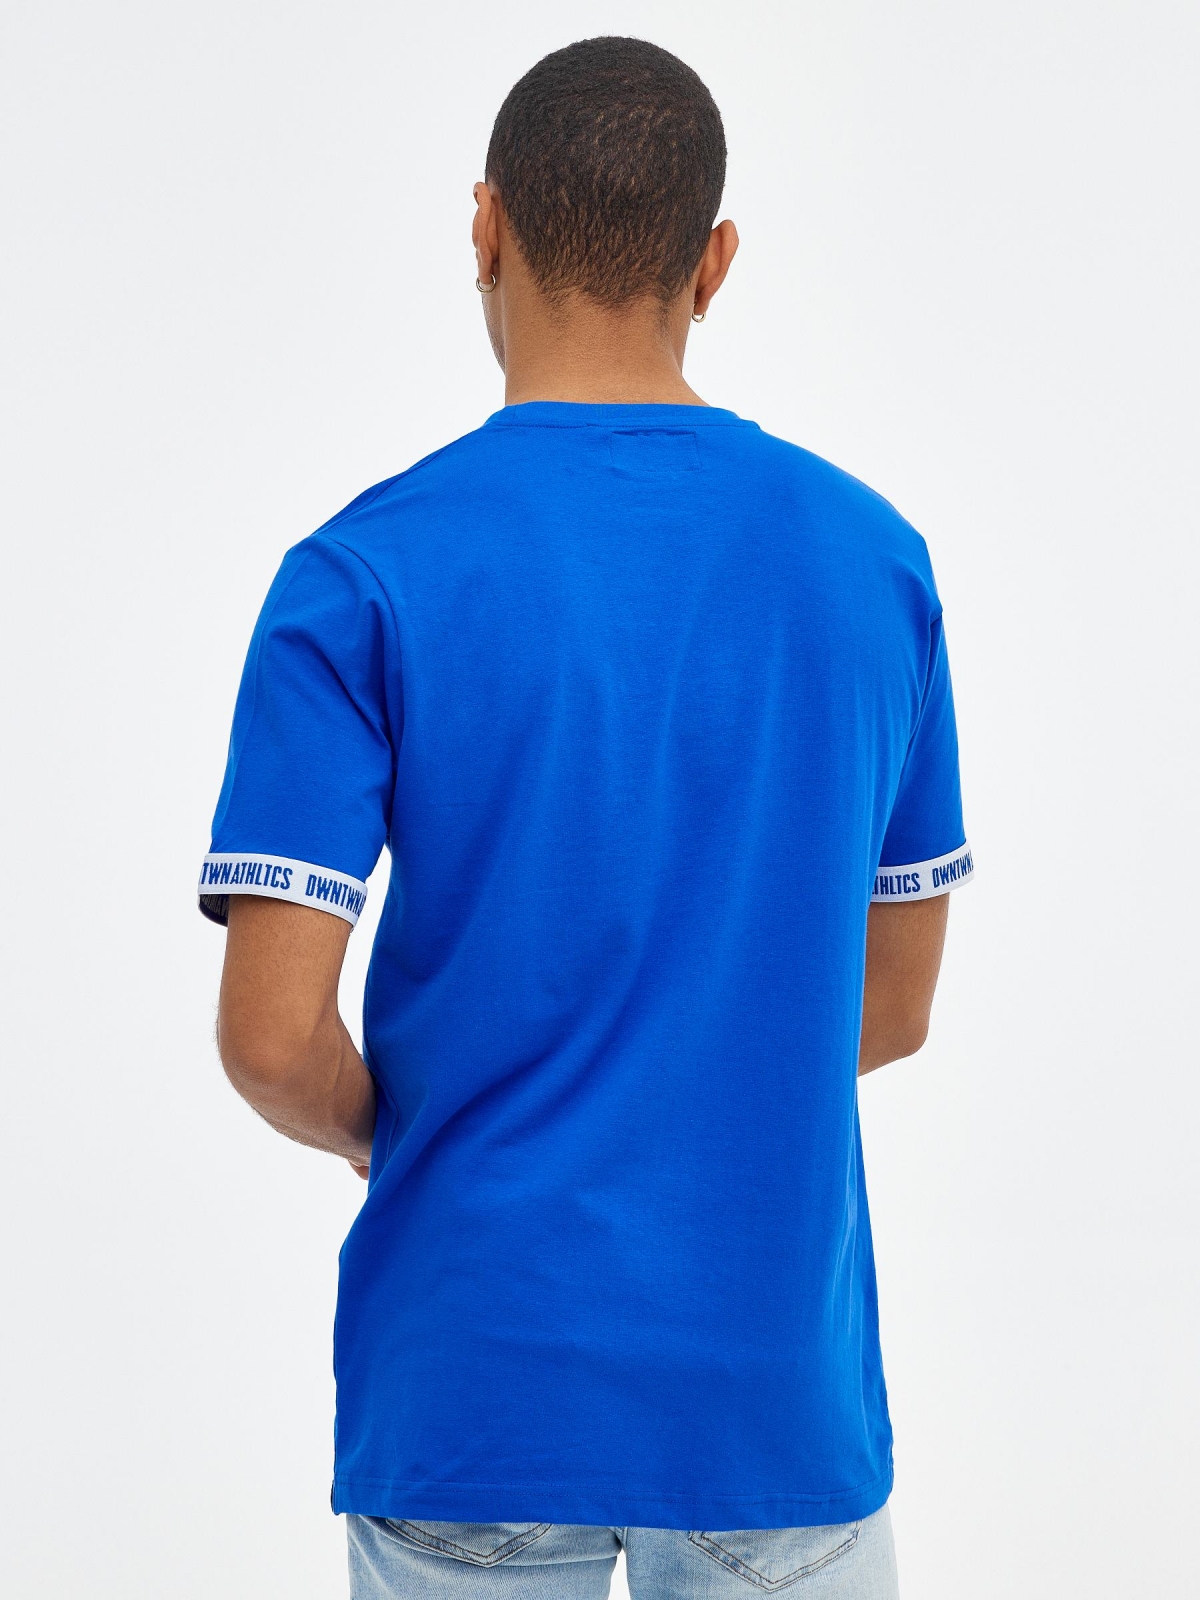 ATHLTCS T-shirt electric blue middle back view